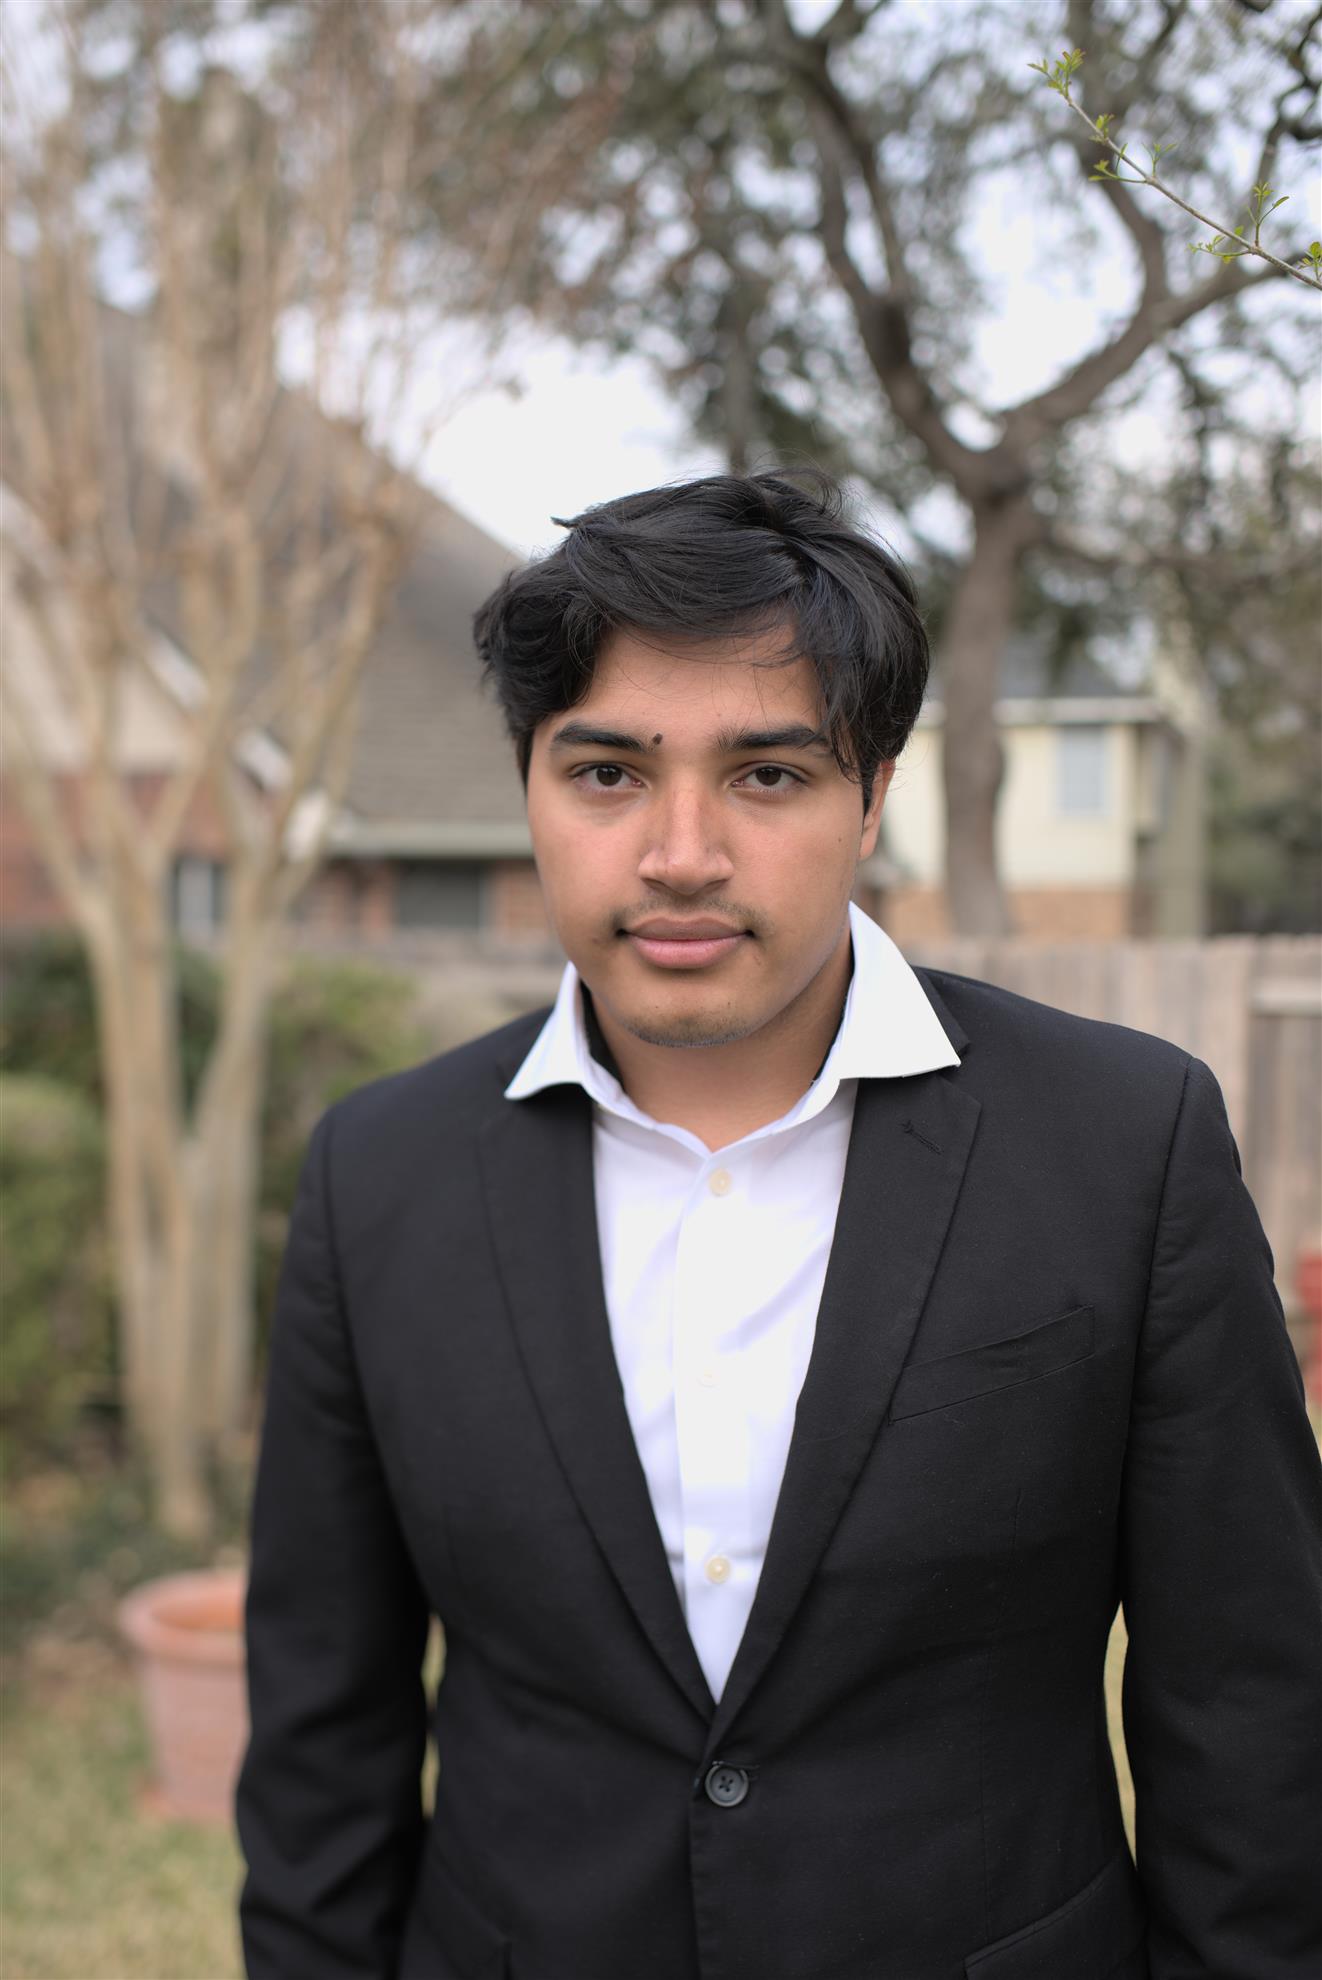 2021-22 Cutler-Bell Student Winner Shoumik Roychowdhury is a young man with a black suit jacket and white button down shirt. He has medium brown skin, short black hair and brown eyes. He stands outside and looks into the camera with hands in his pockets.